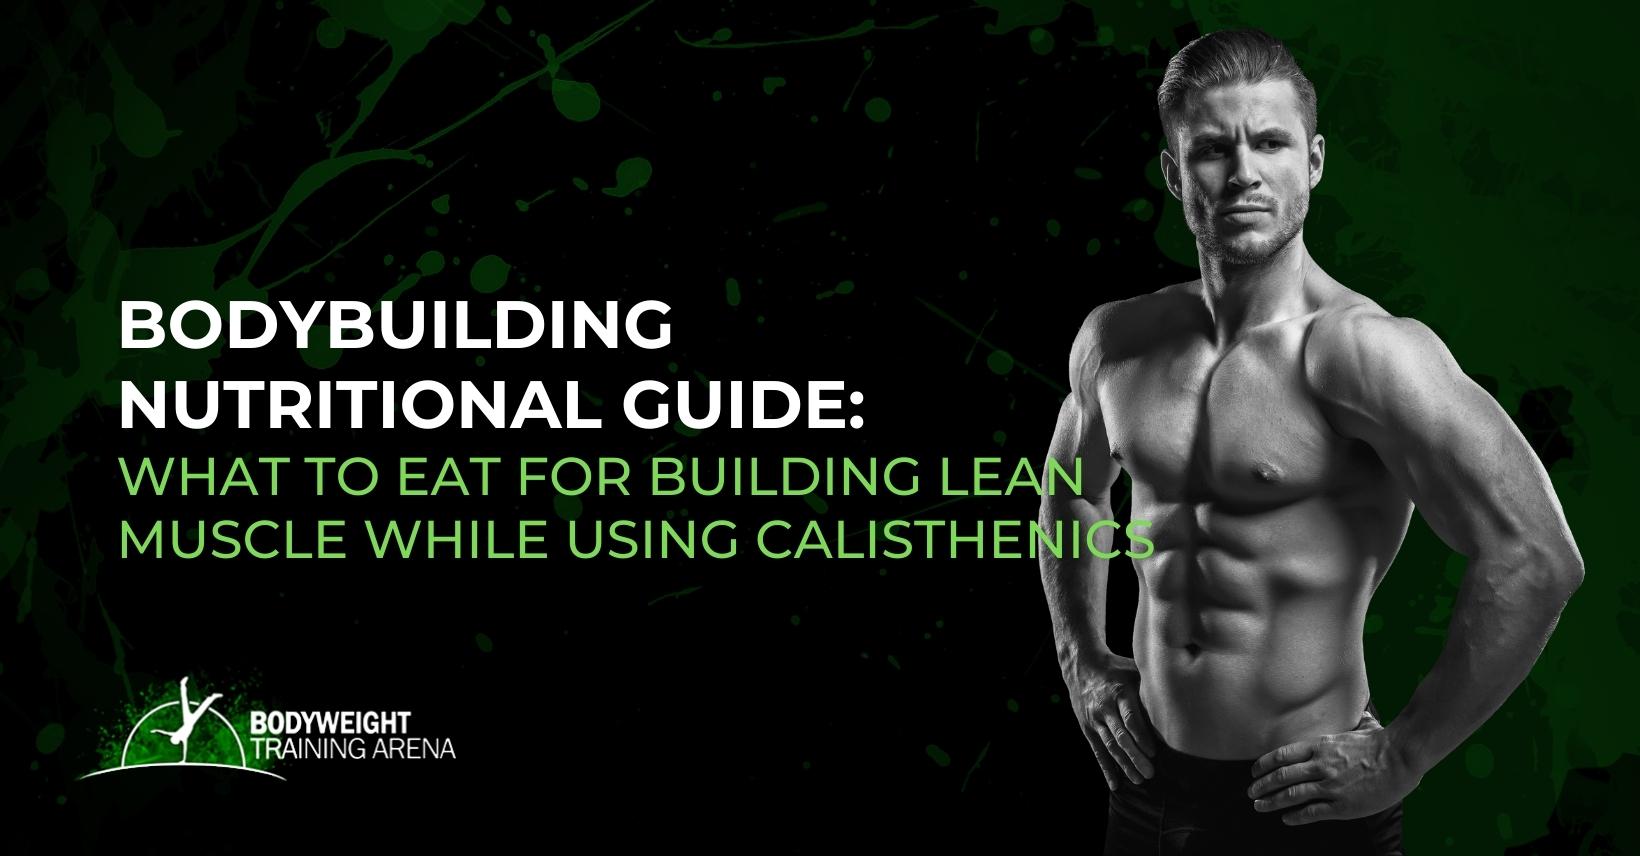 Bodybuilding nutritional guide: What to Eat for Building Lean Muscle While Using Calisthenics